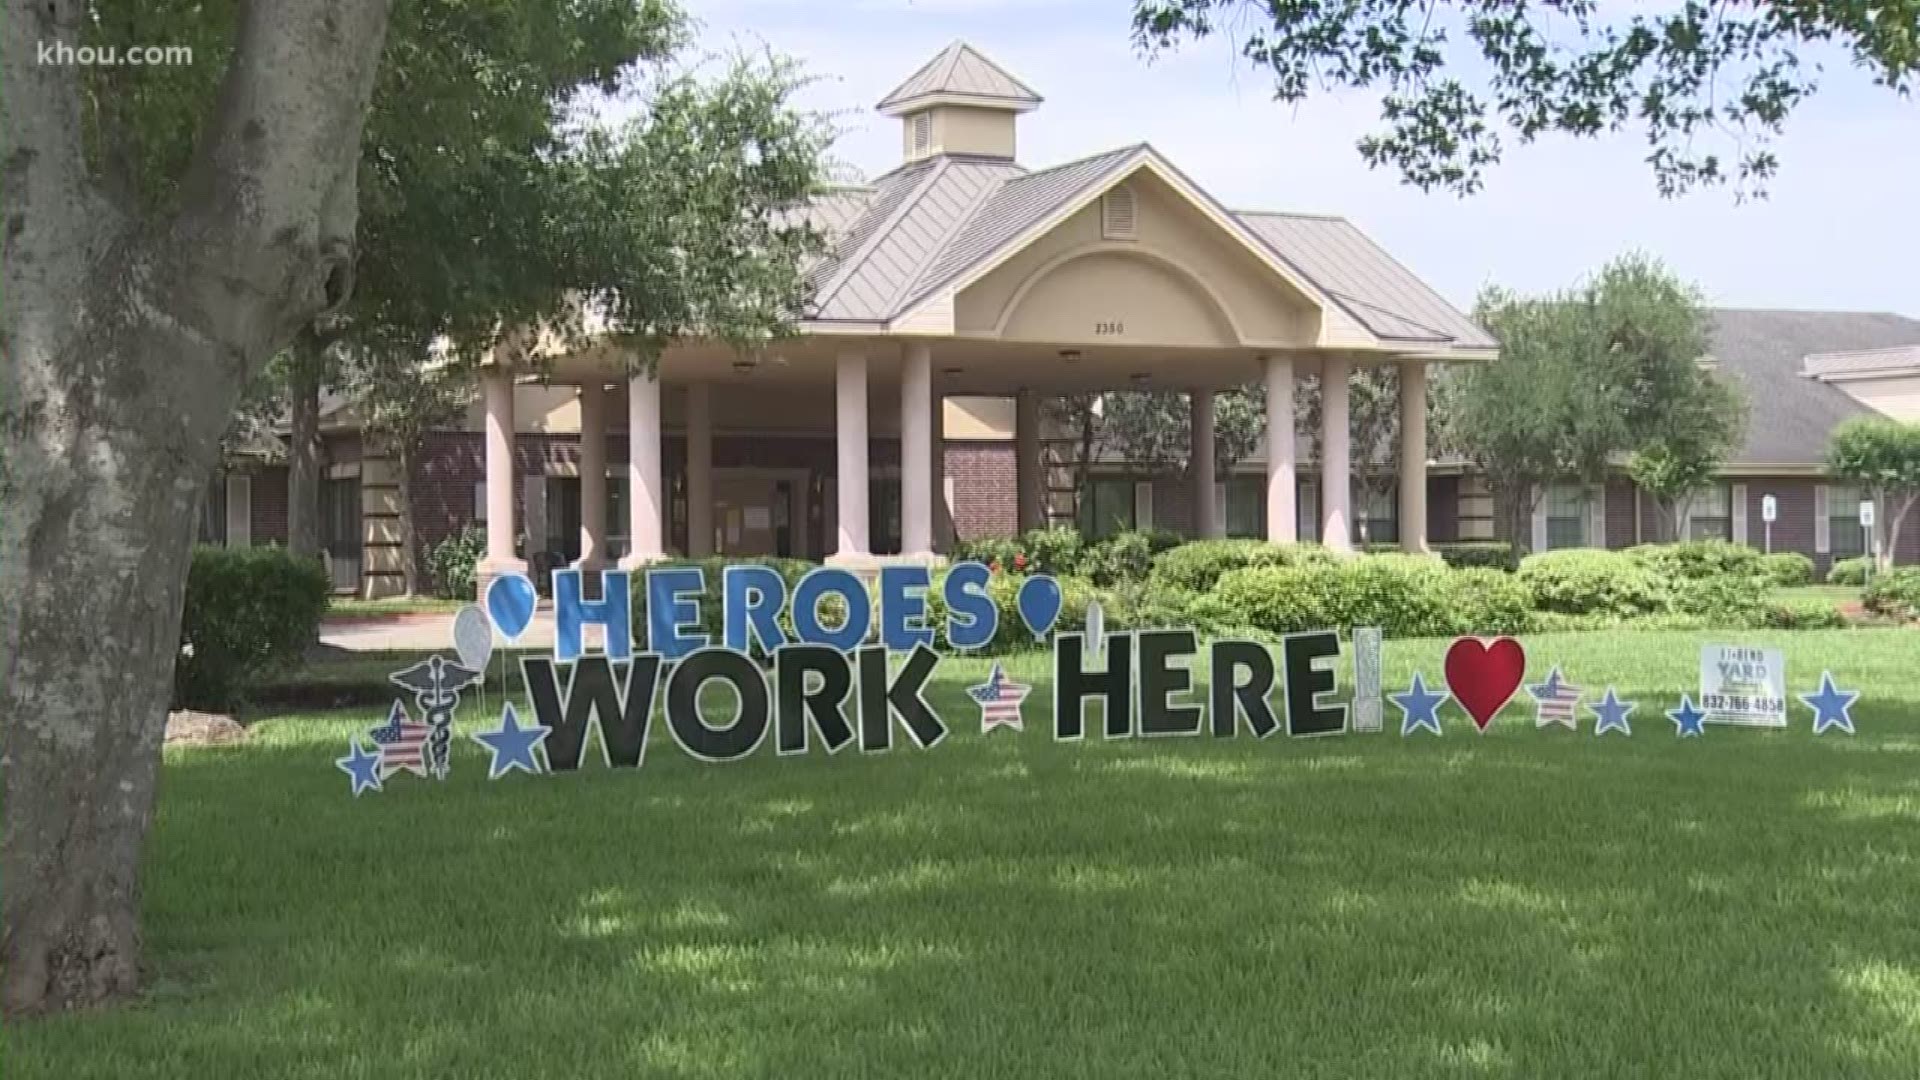 KHOU 11 News' Chris Costa talks to staff at the Park Manor at Quail Valley in Missouri City, where 28 residents and employees recently tested positive for COVID-19.